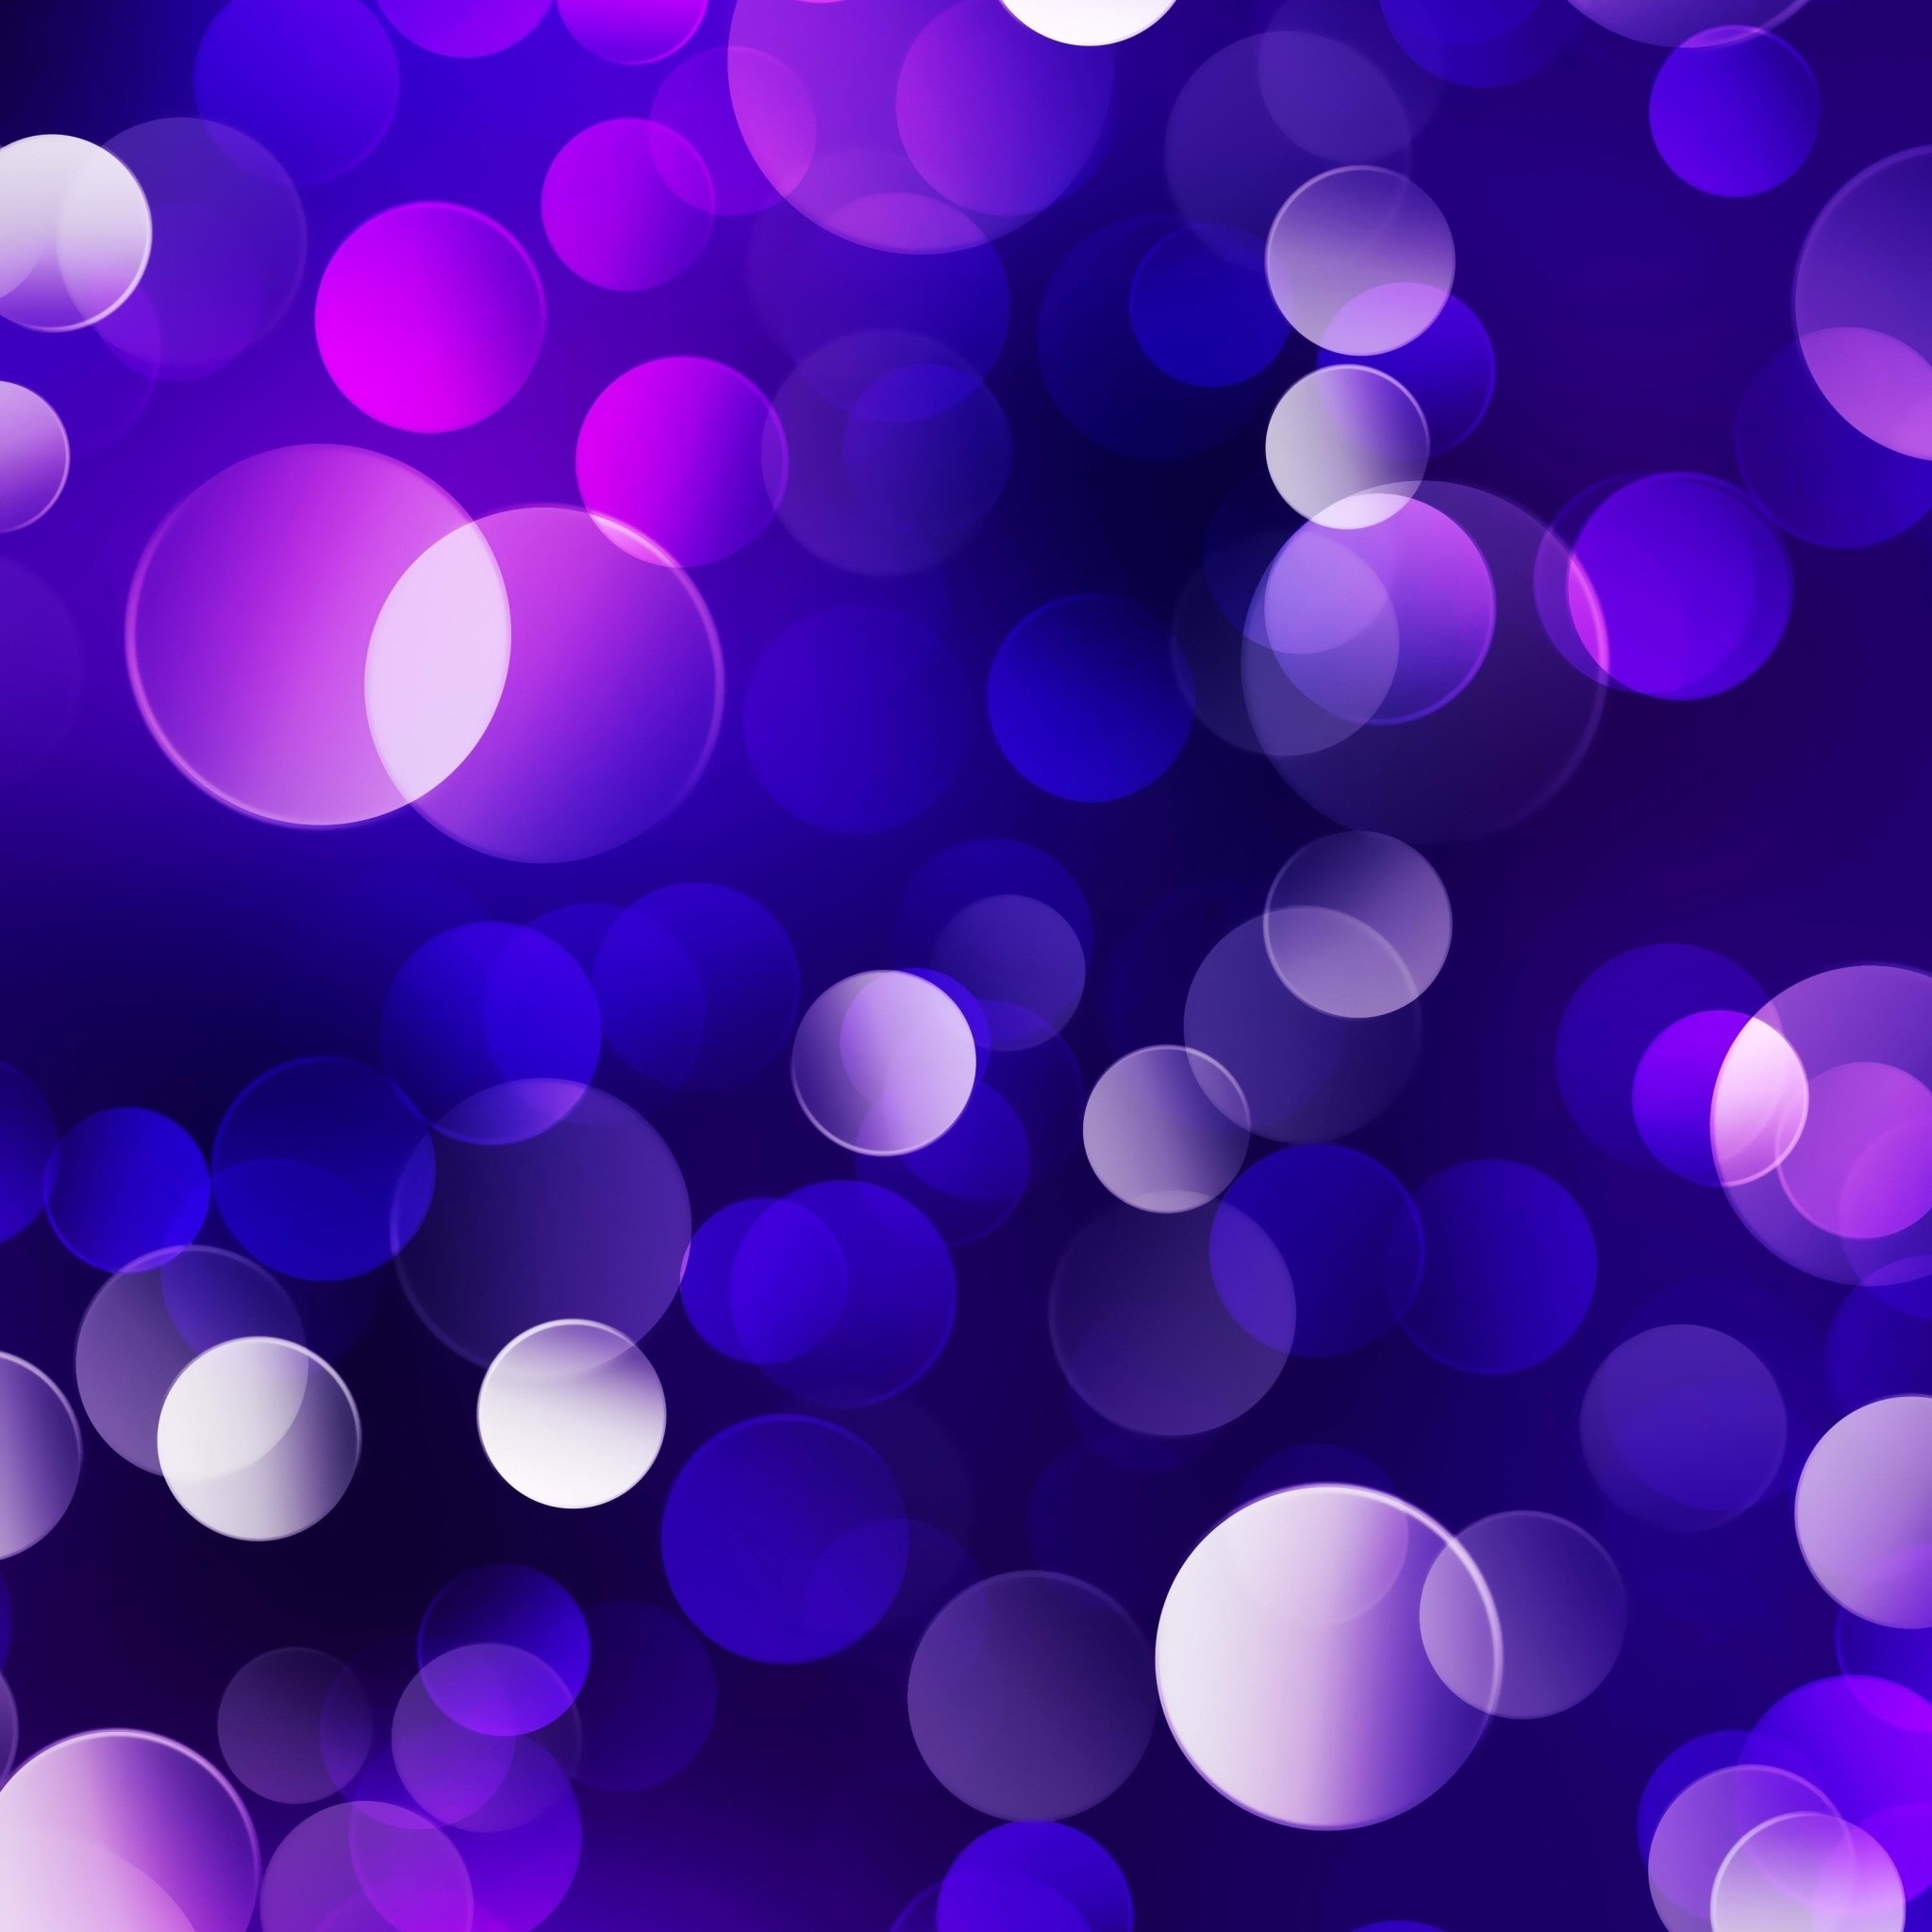 Purple Abstract Background HD wallpaper download in 2048×2048, 1024×1024  resolutions. Find similar and same